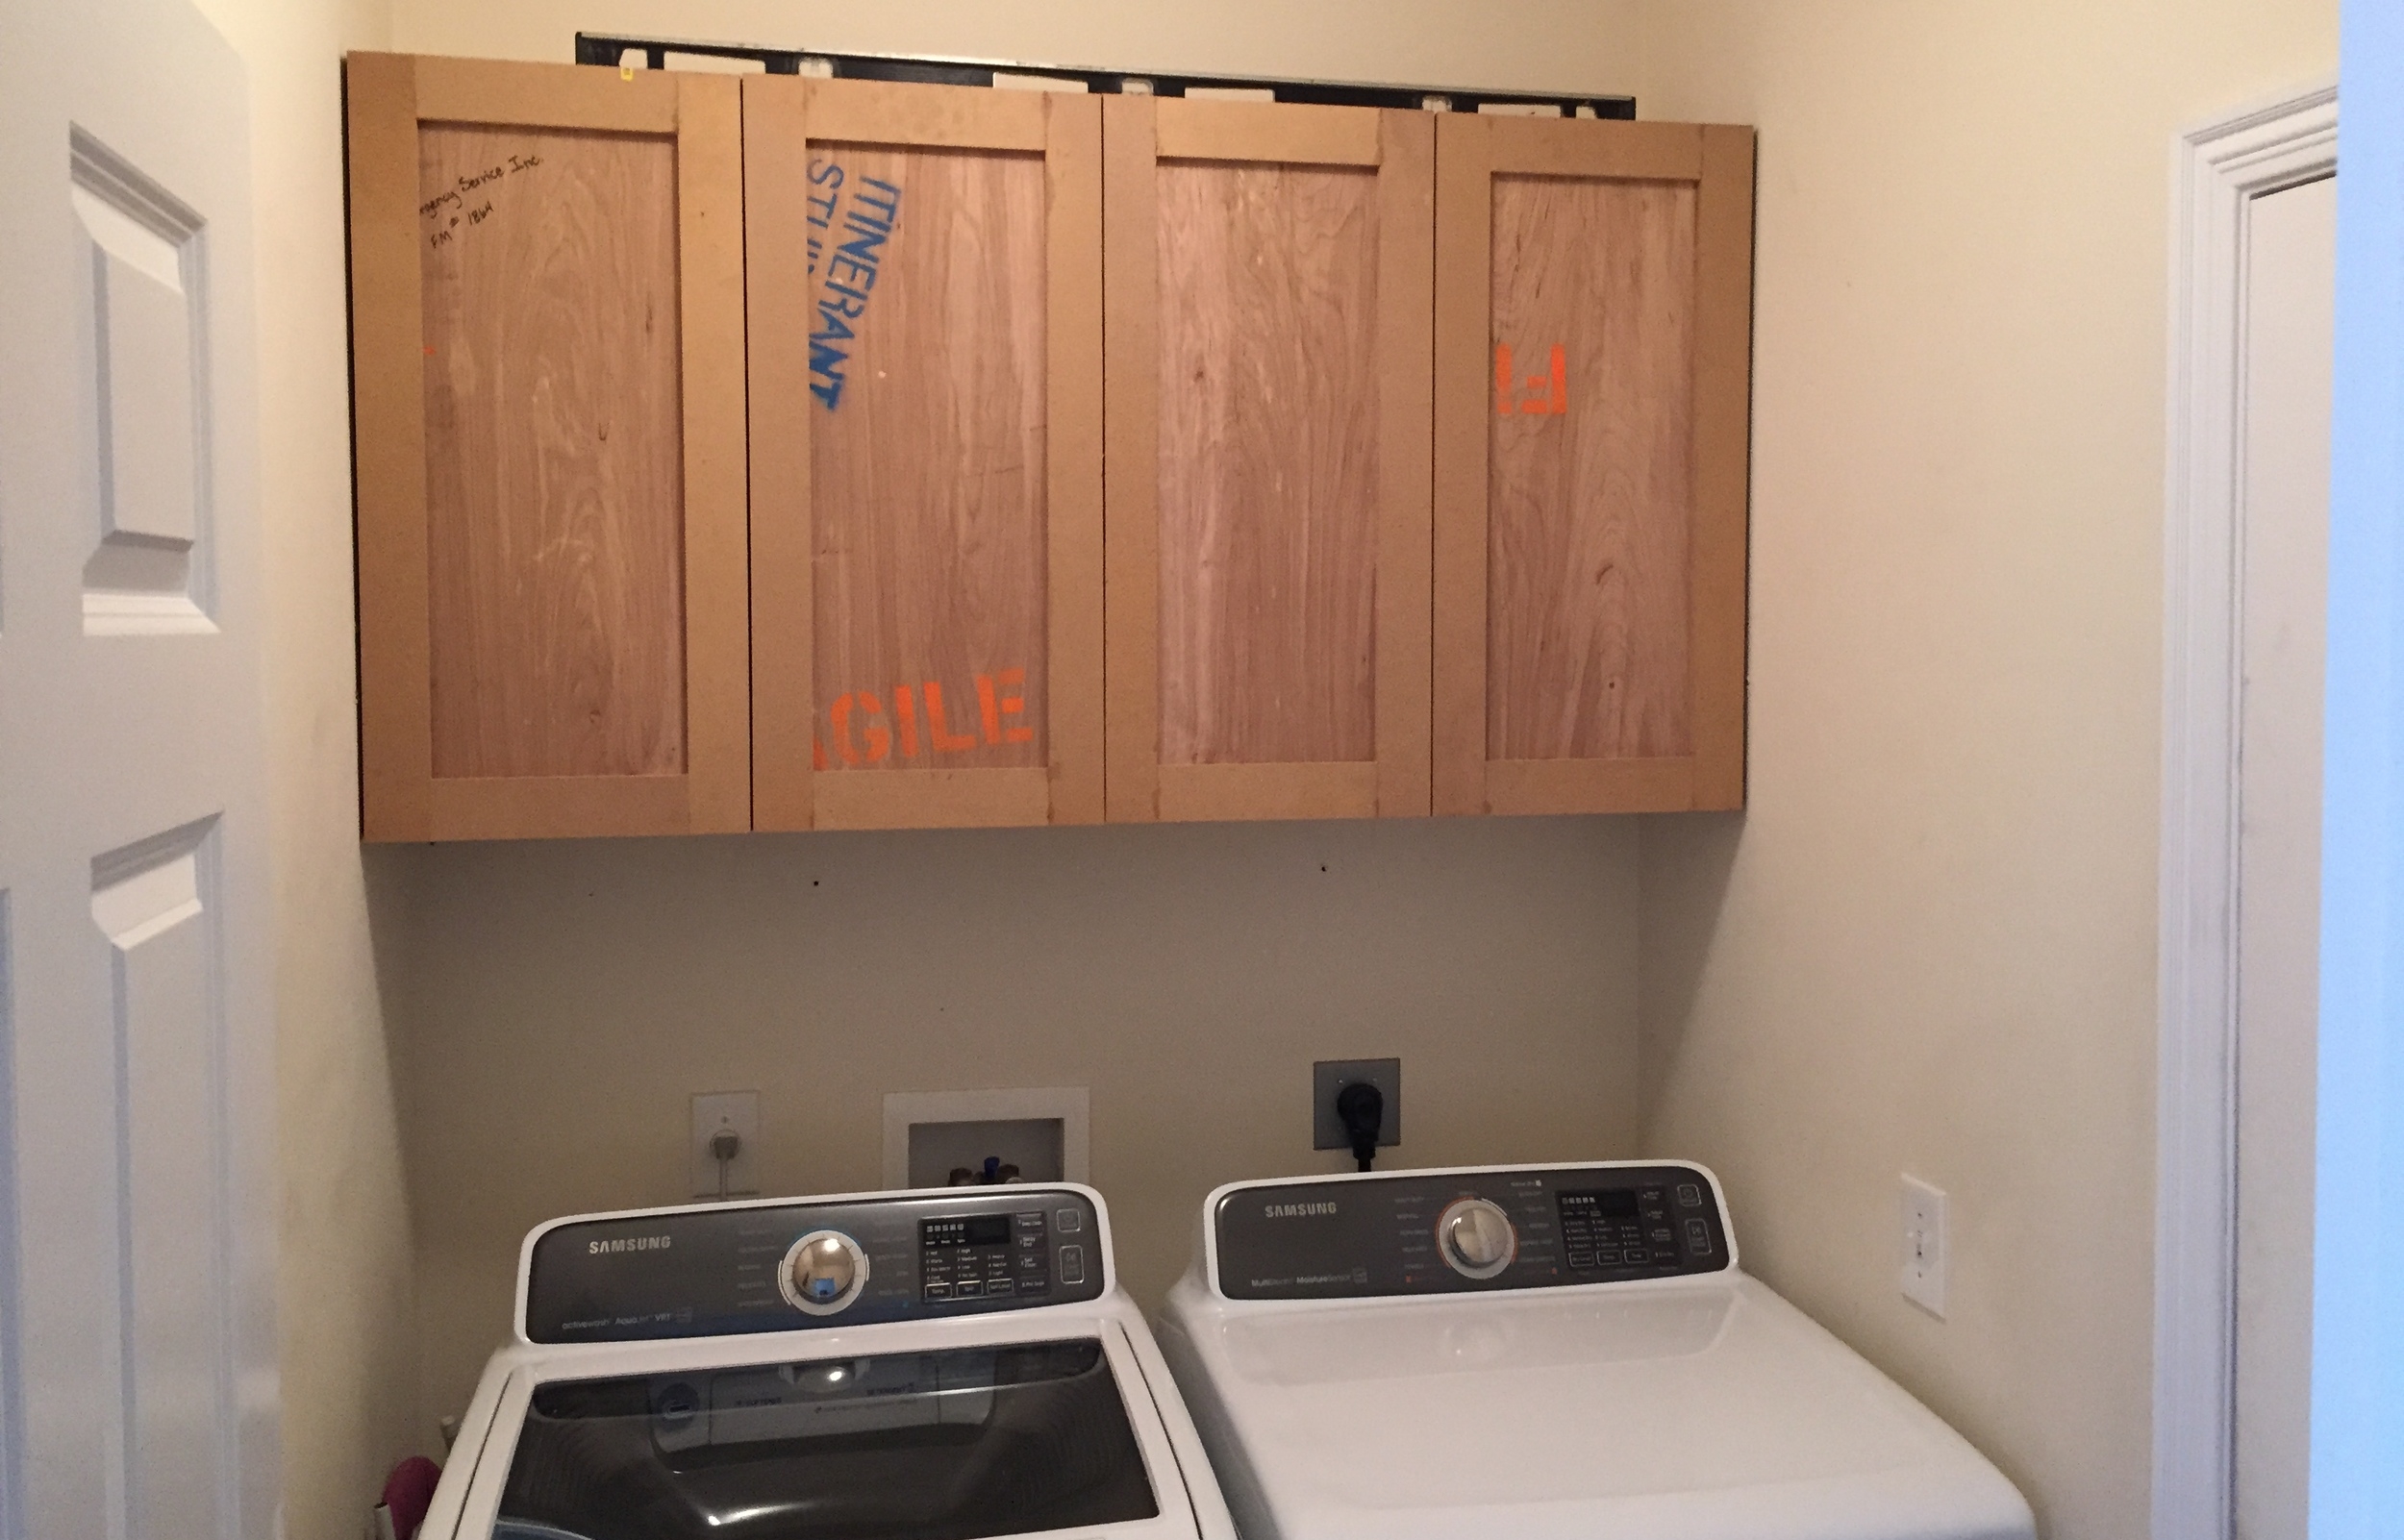 Upper Cabinets Laundry Room Makeover, How Deep Should Laundry Room Cabinets Be